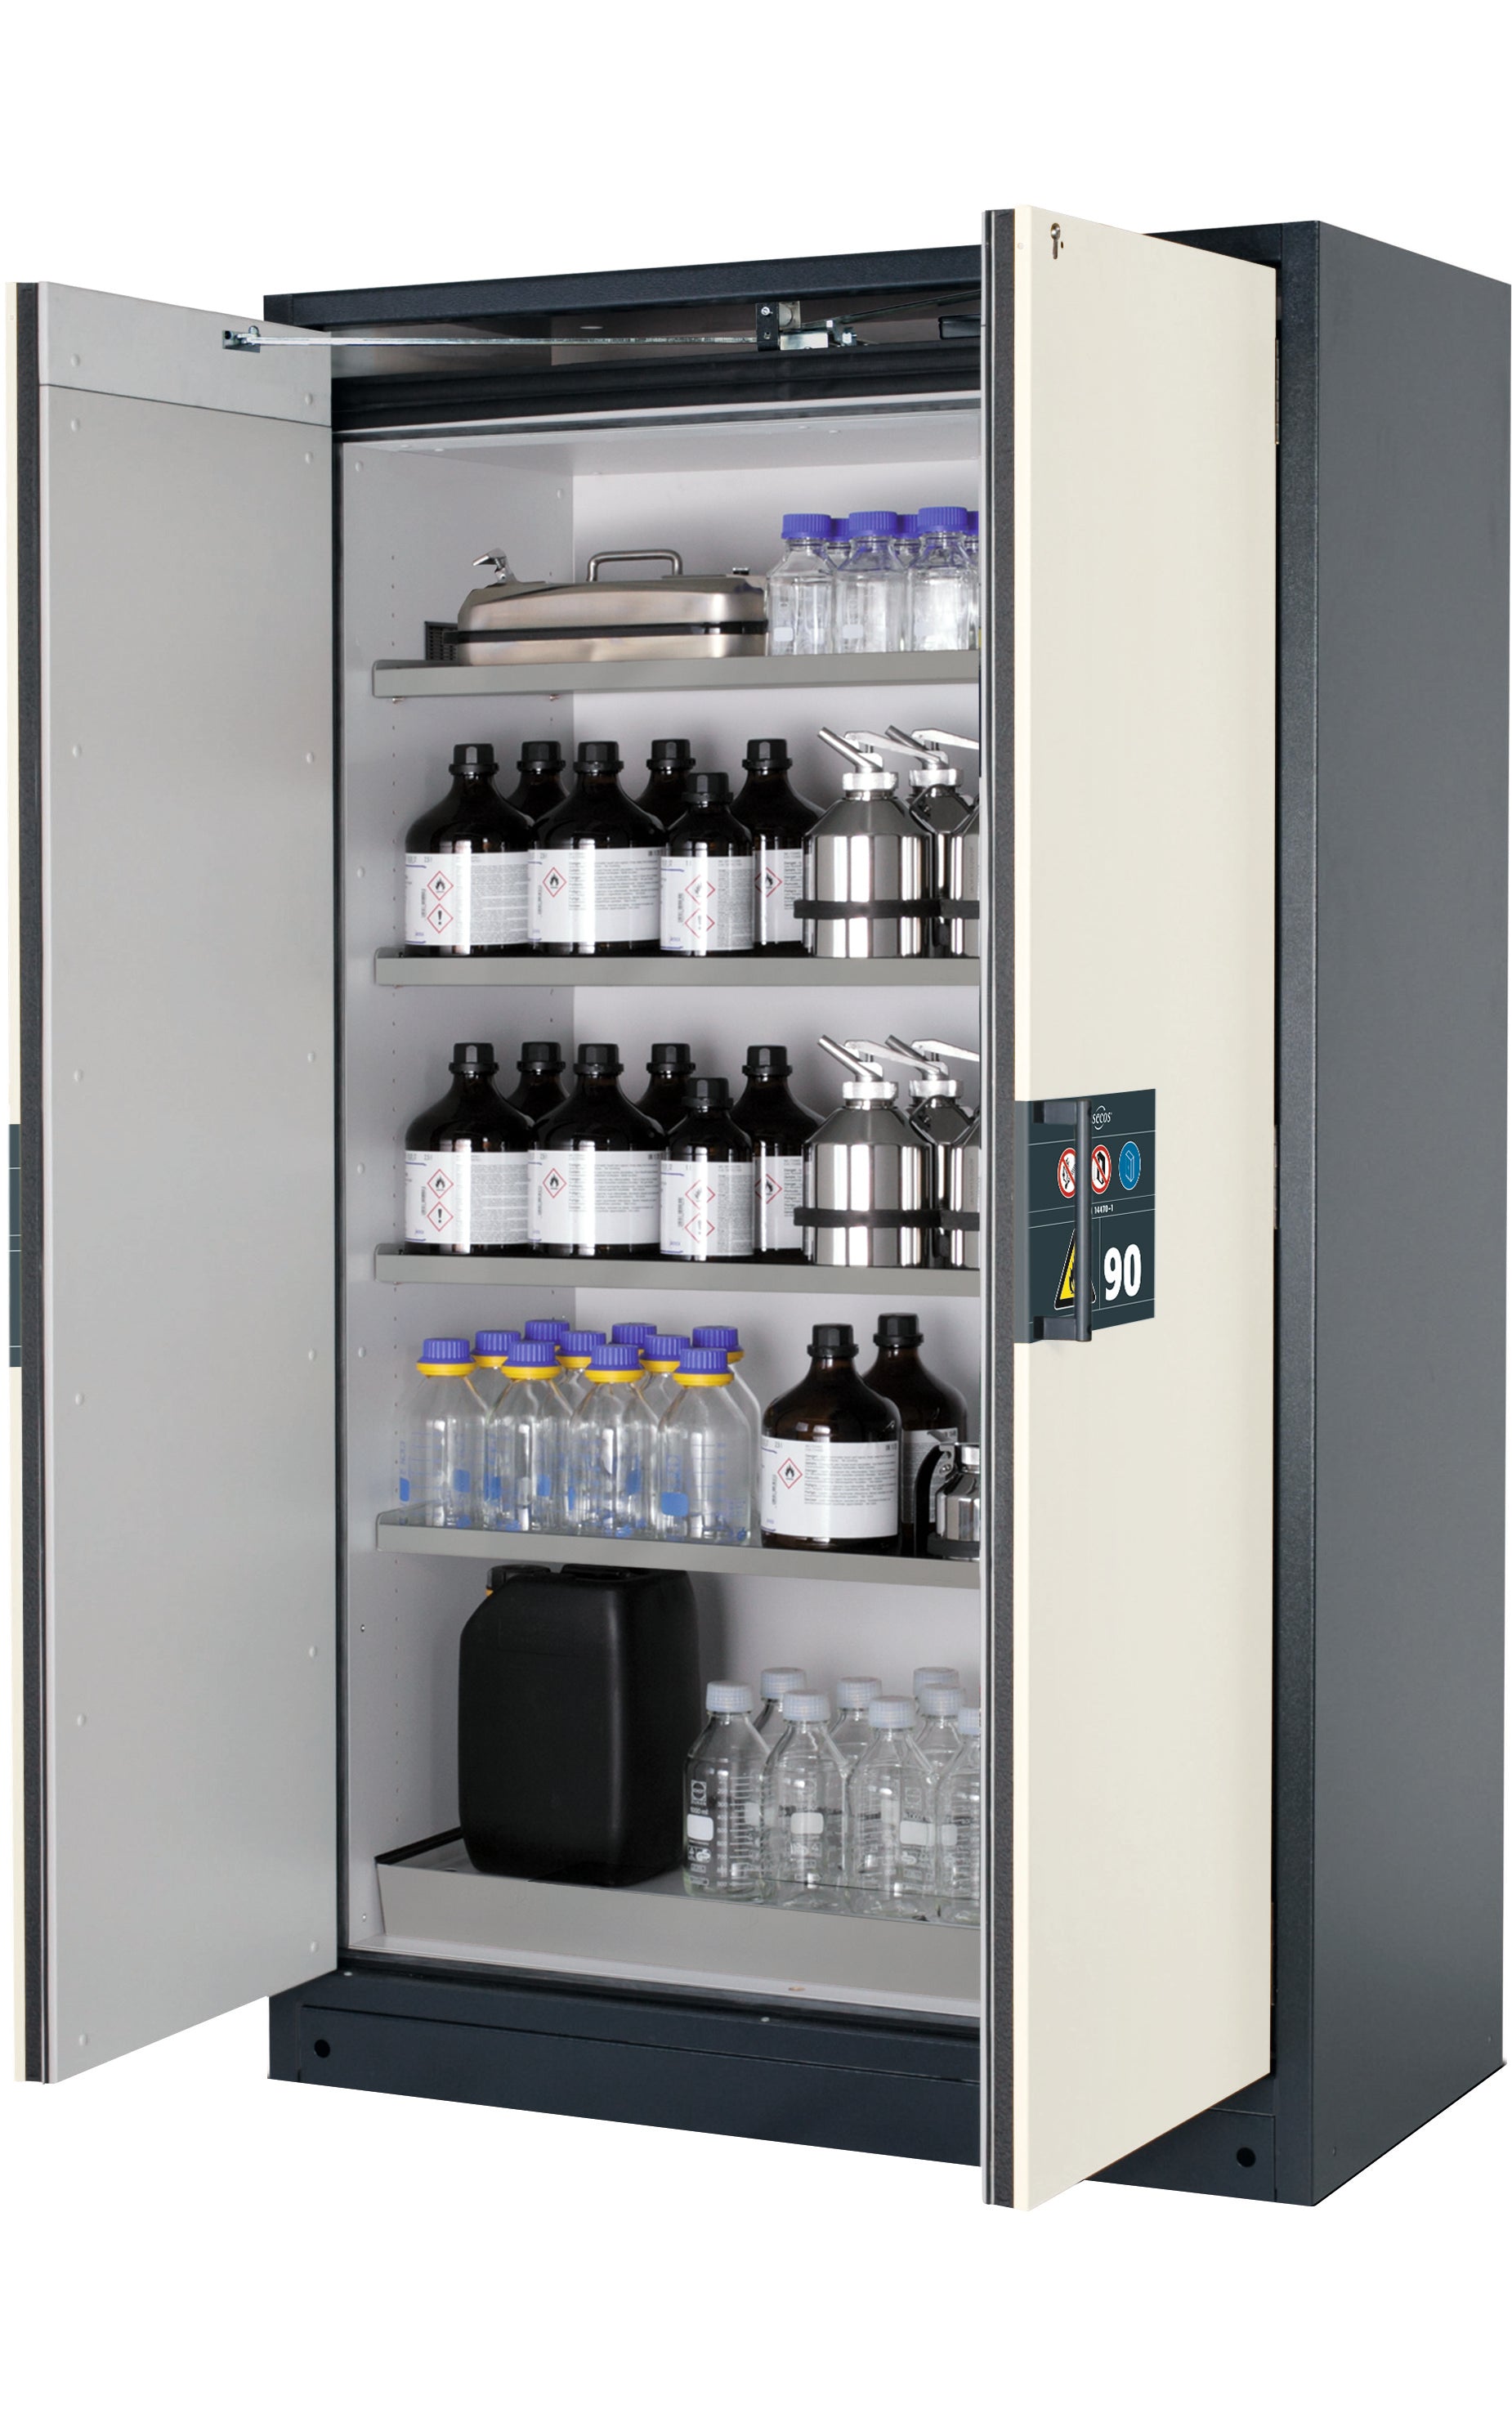 Type 90 safety storage cabinet Q-PEGASUS-90 model Q90.195.120.WDAC in pure white RAL 9010 with 4x shelf standard (stainless steel 1.4301),